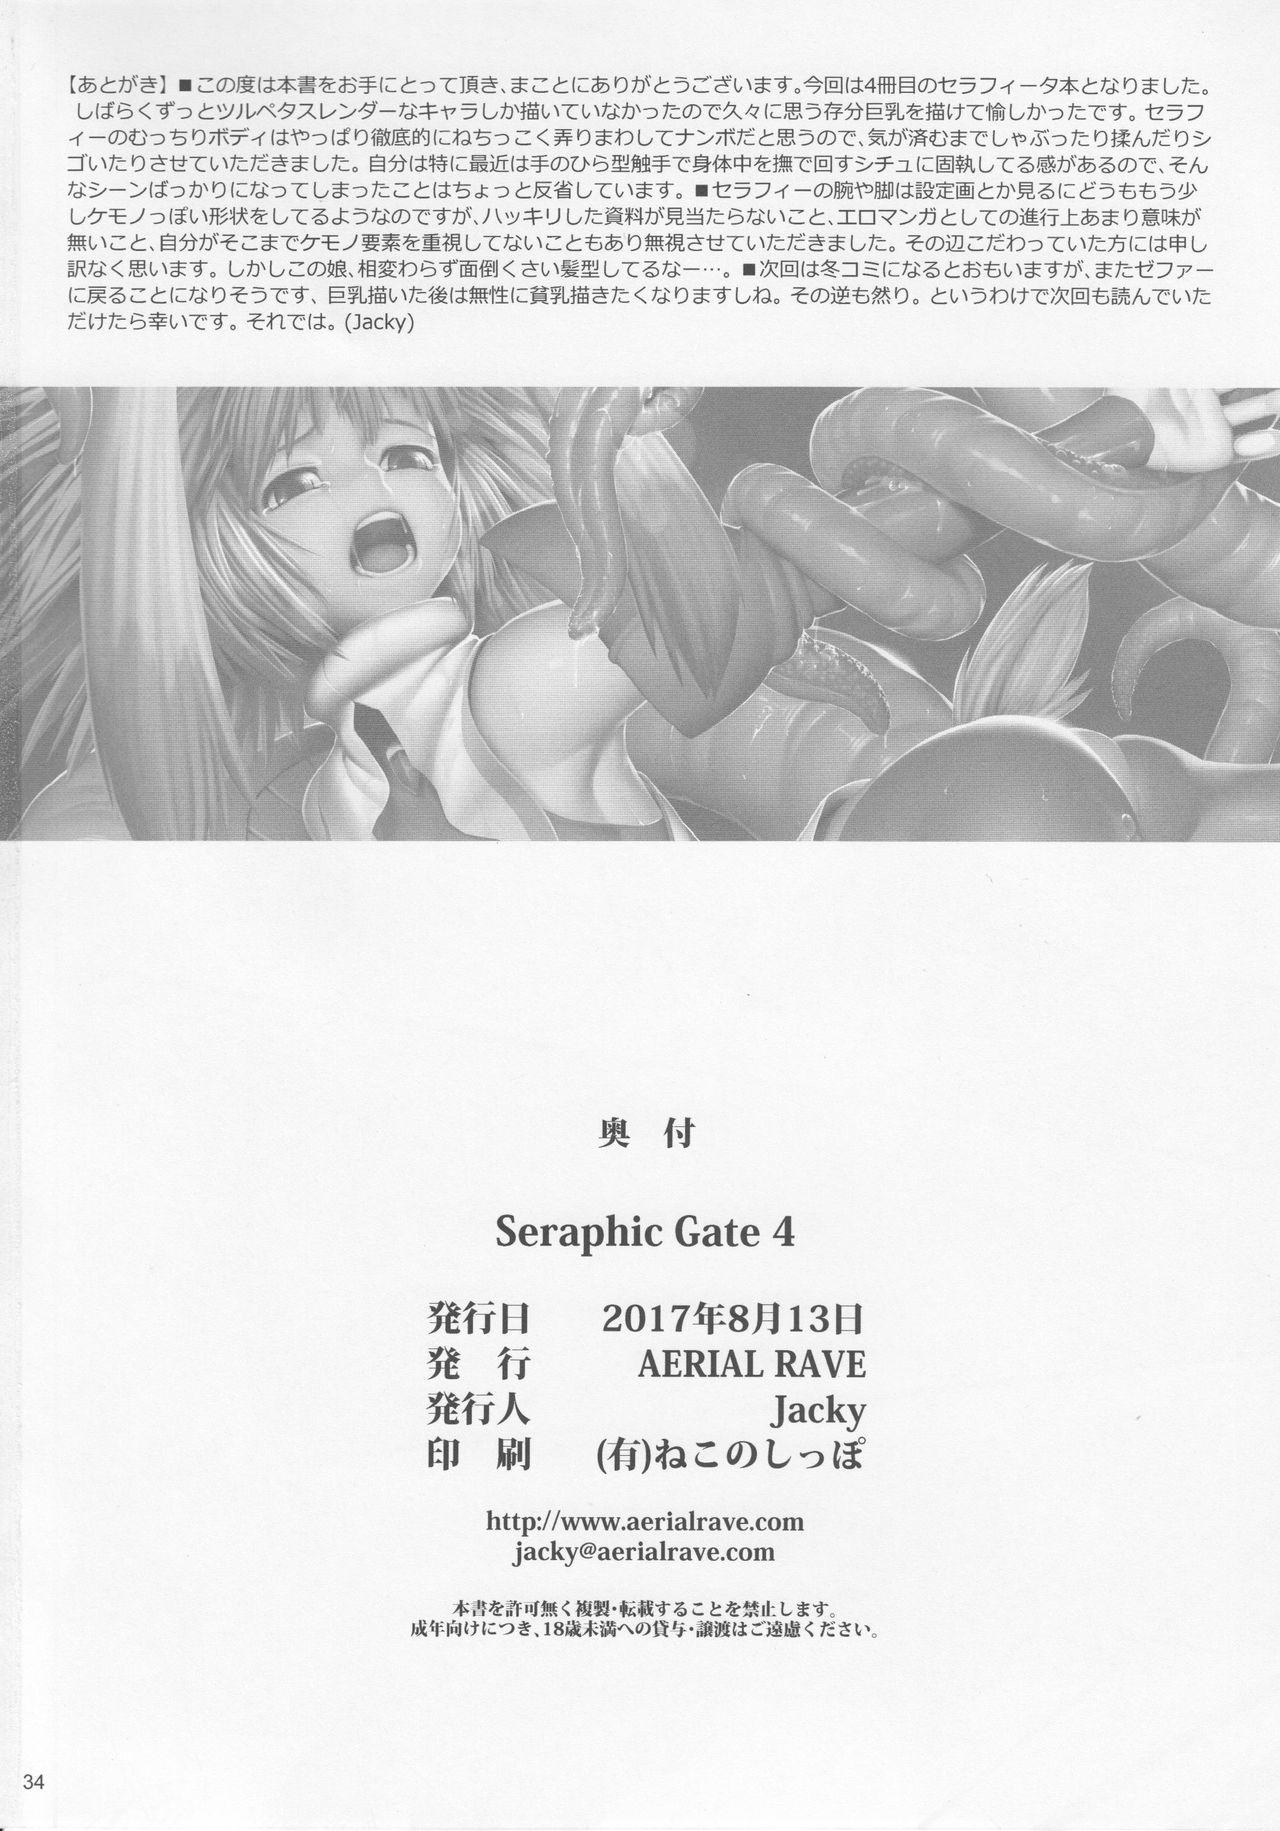 Linda Seraphic Gate 4 - Xenogears Pay - Page 33